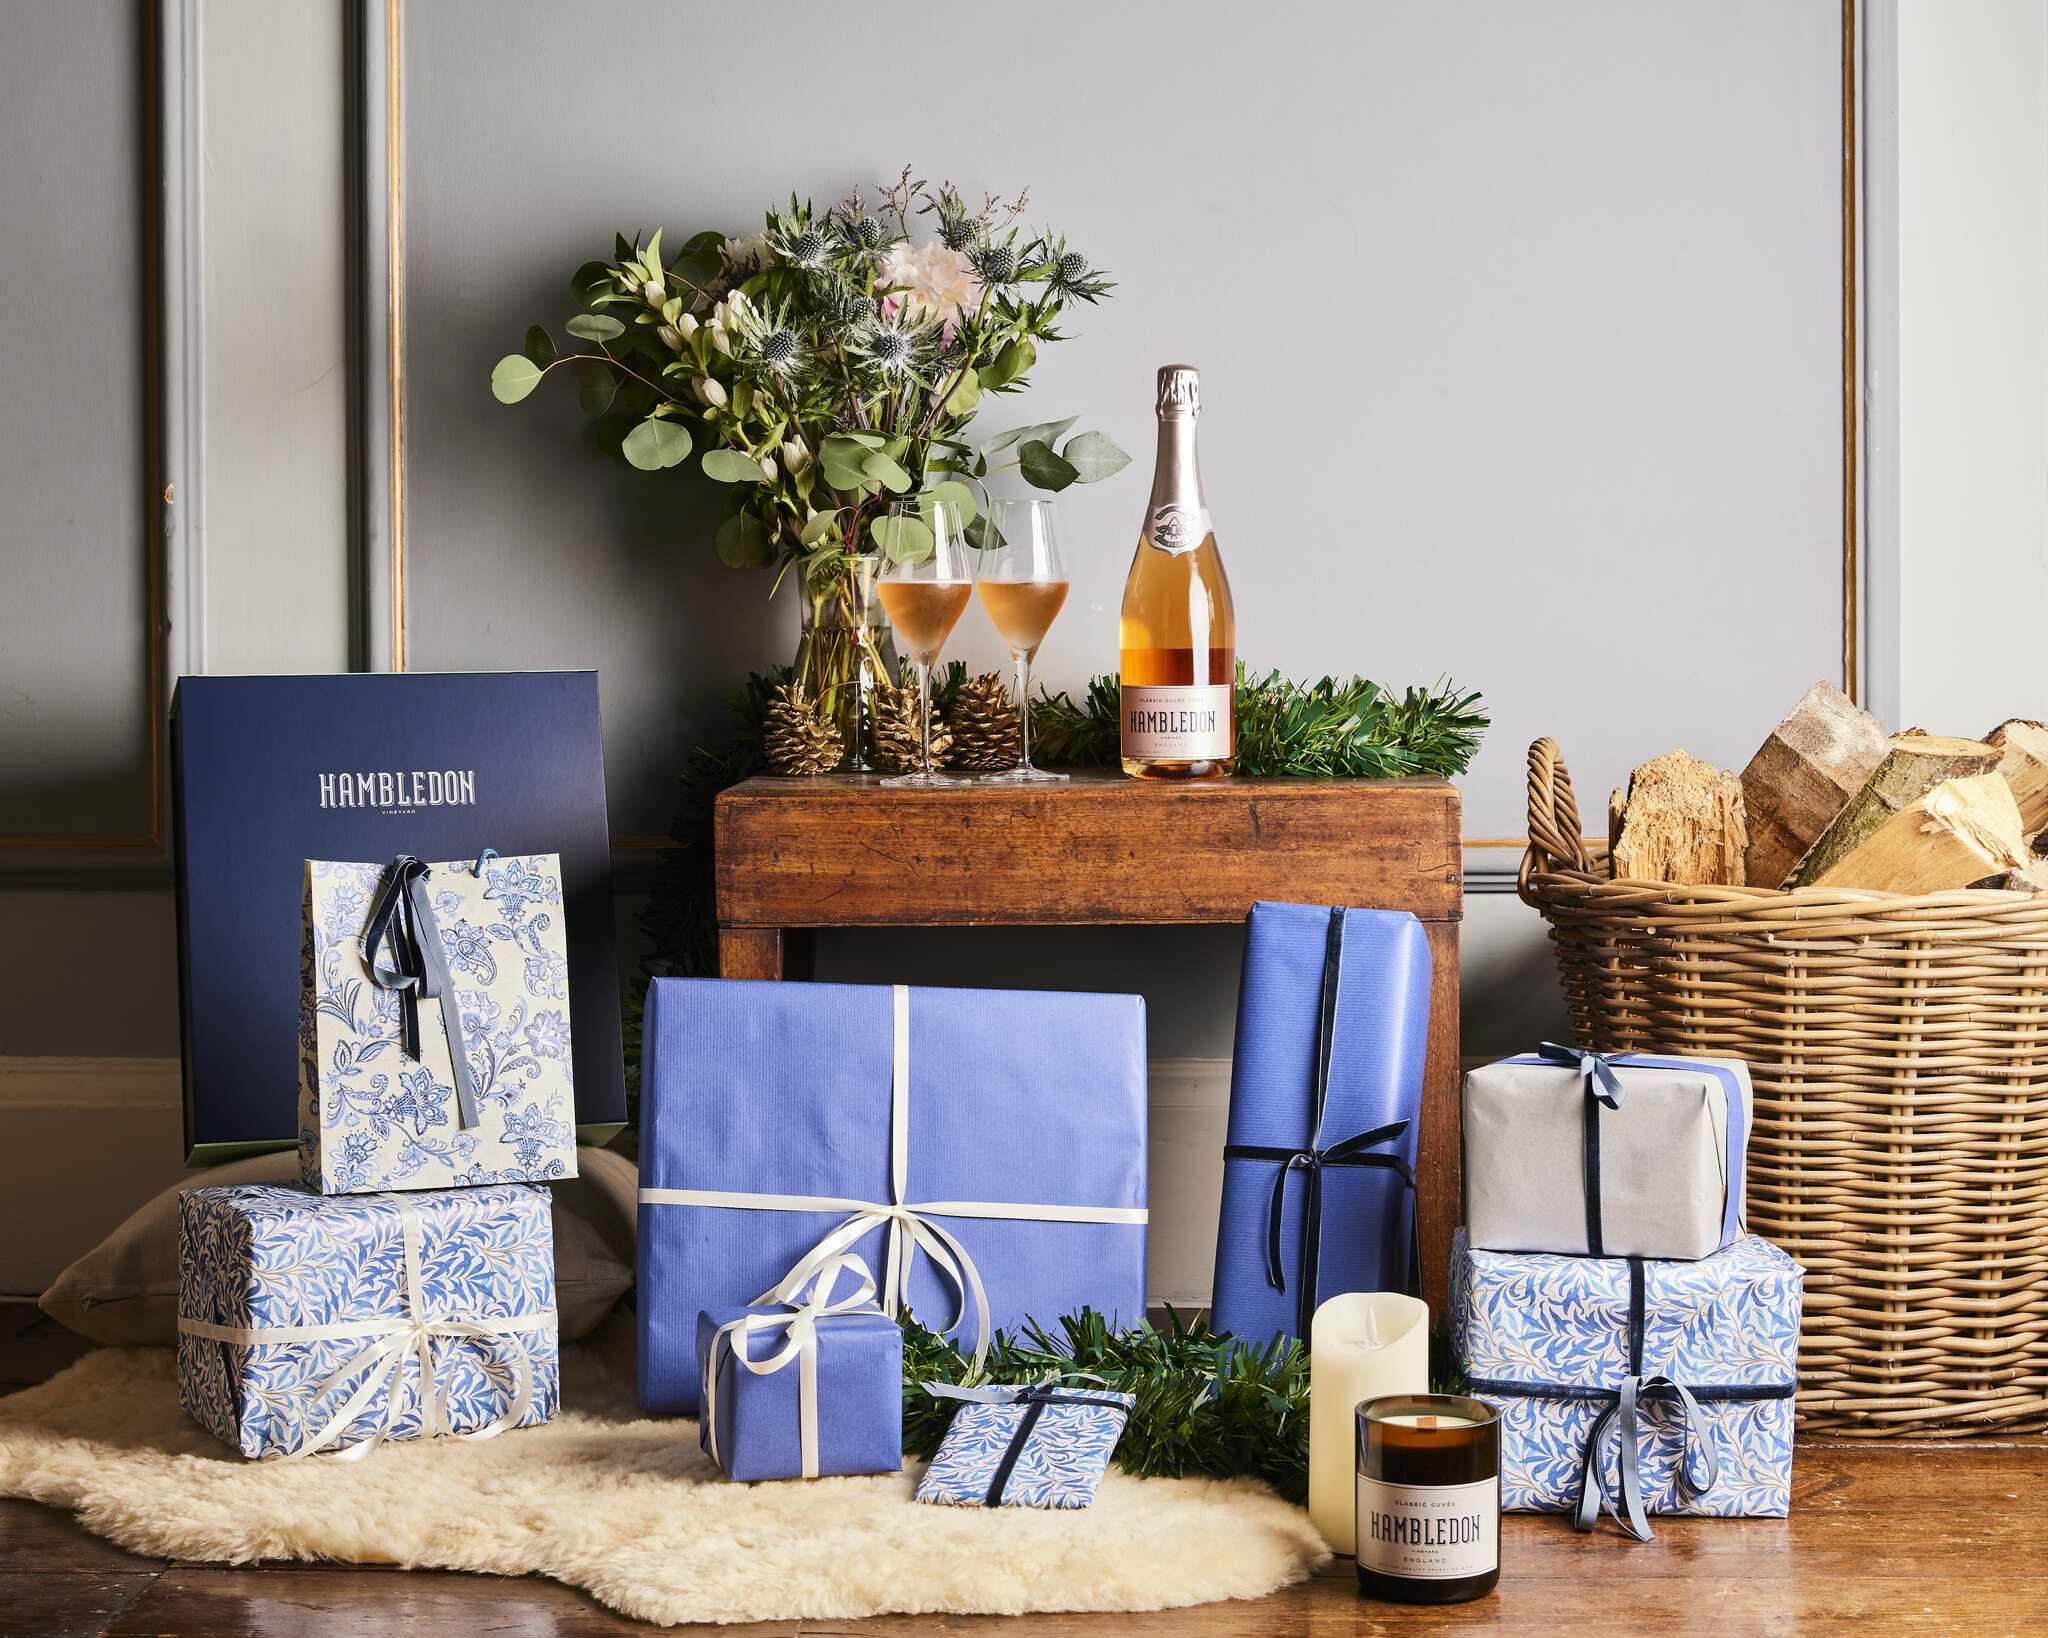 Gifts for Her: Hambledon Vineyard's Guide